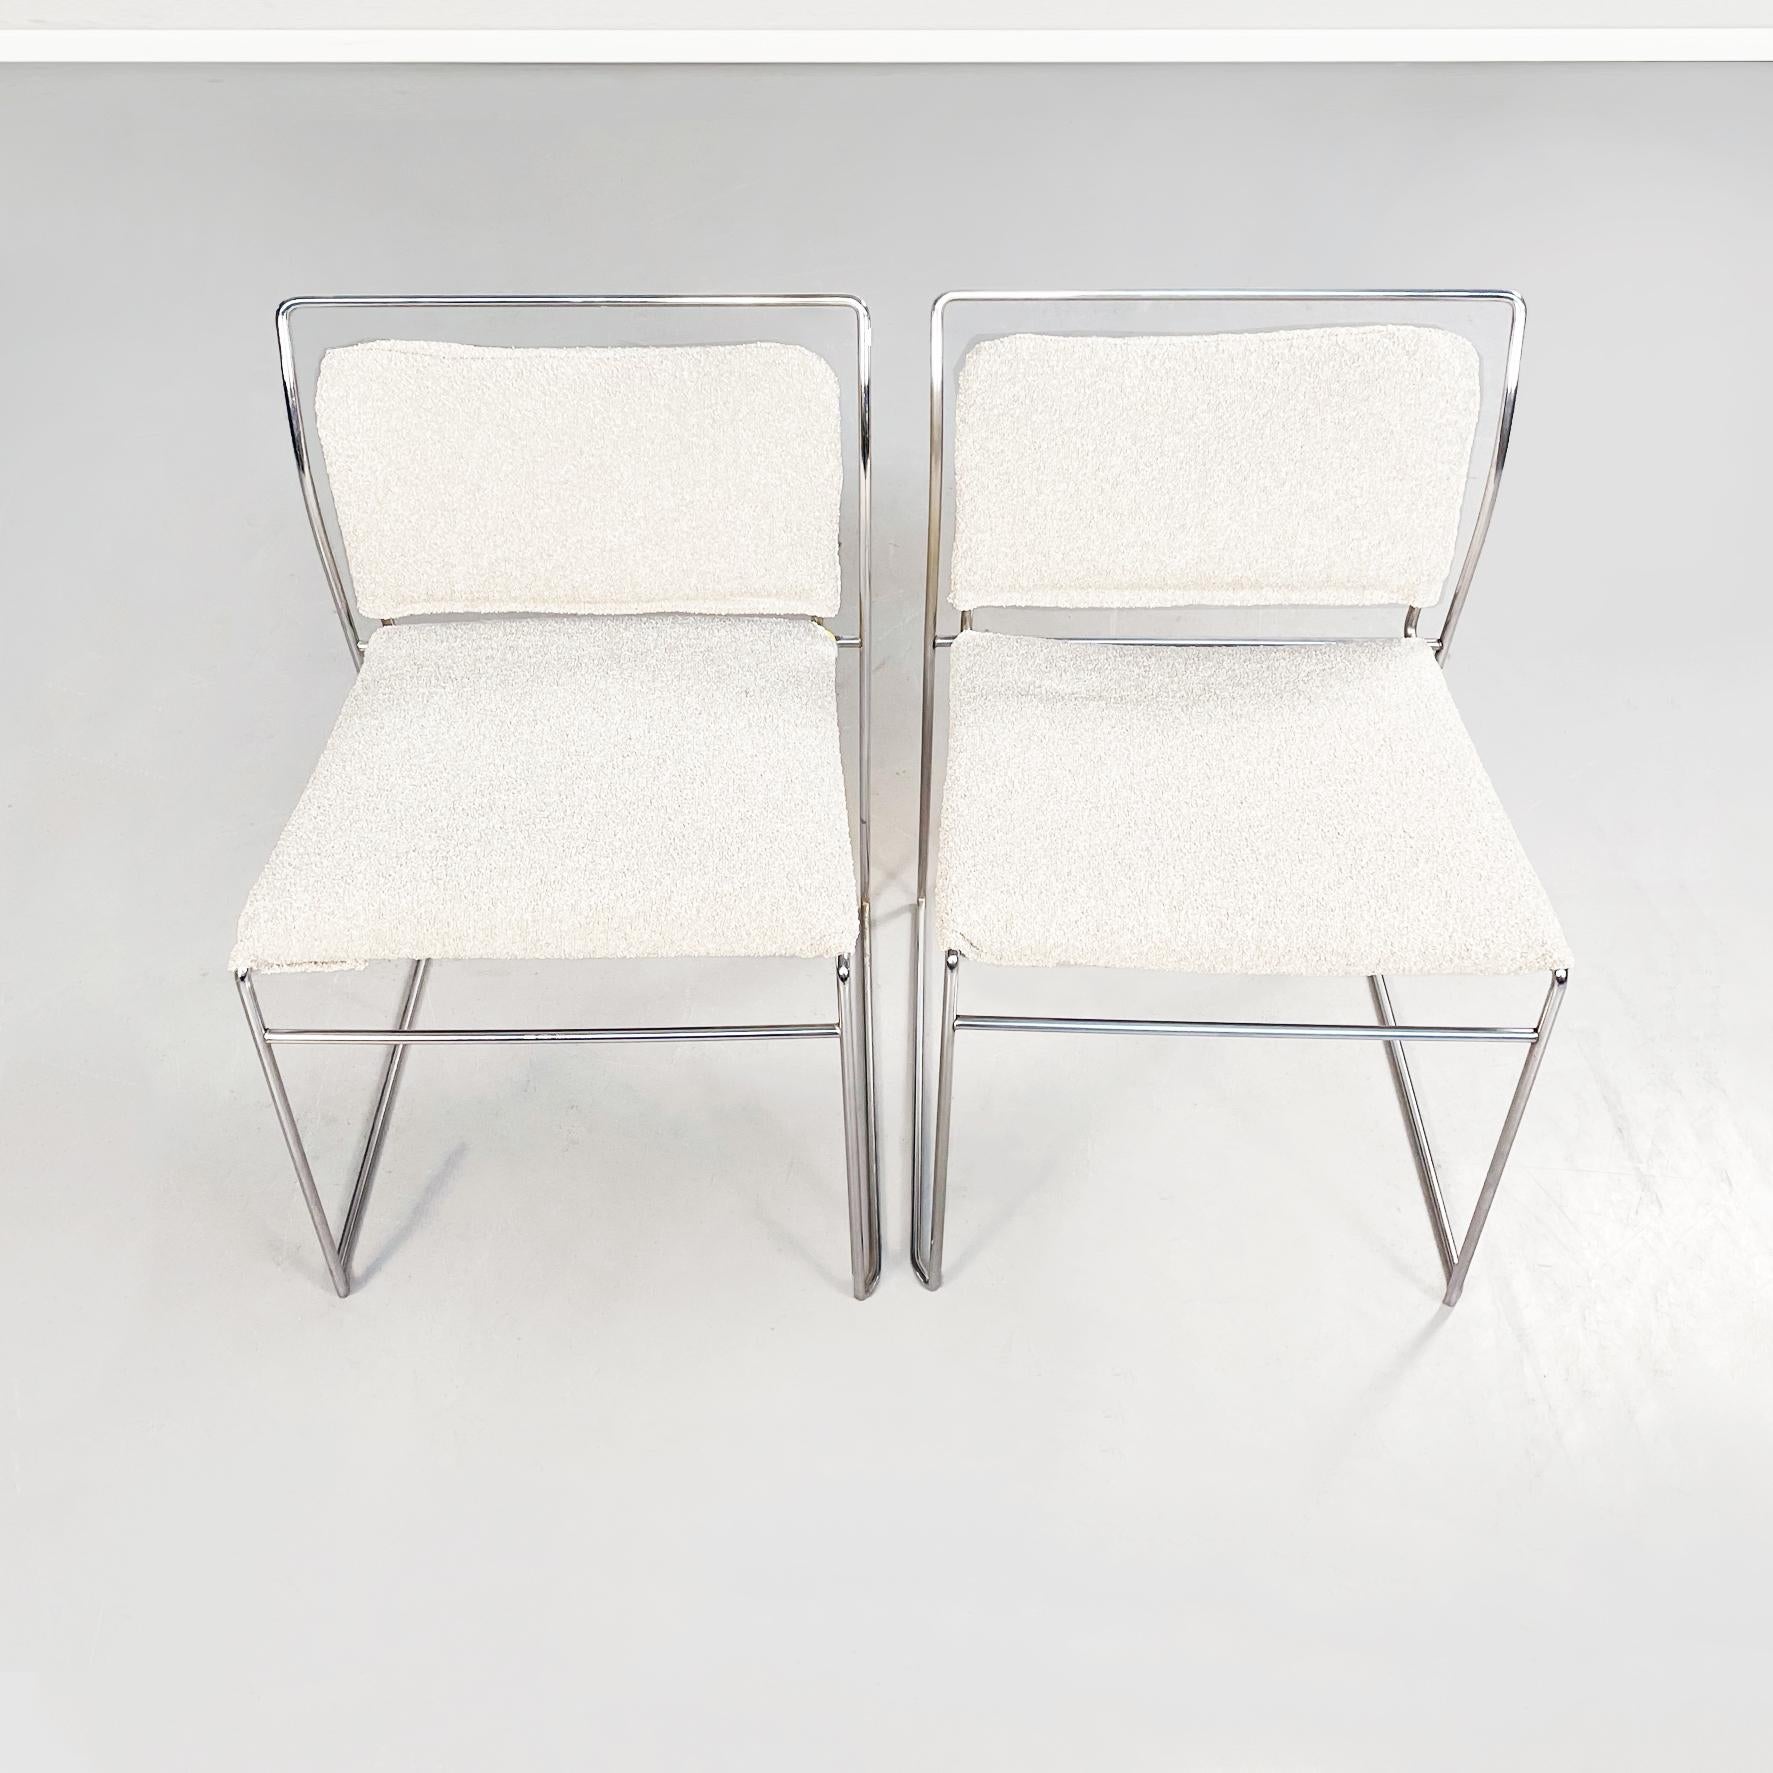 Italian mid-century Bouclè fabric and steel Tulu chairs by Takahama for Cassina, 1968
Pair of Tulu chairs with rectangular seat, padded and covered in bouclè fabric. The tubular structure in stainless steel is visible. The seat fabric is supported